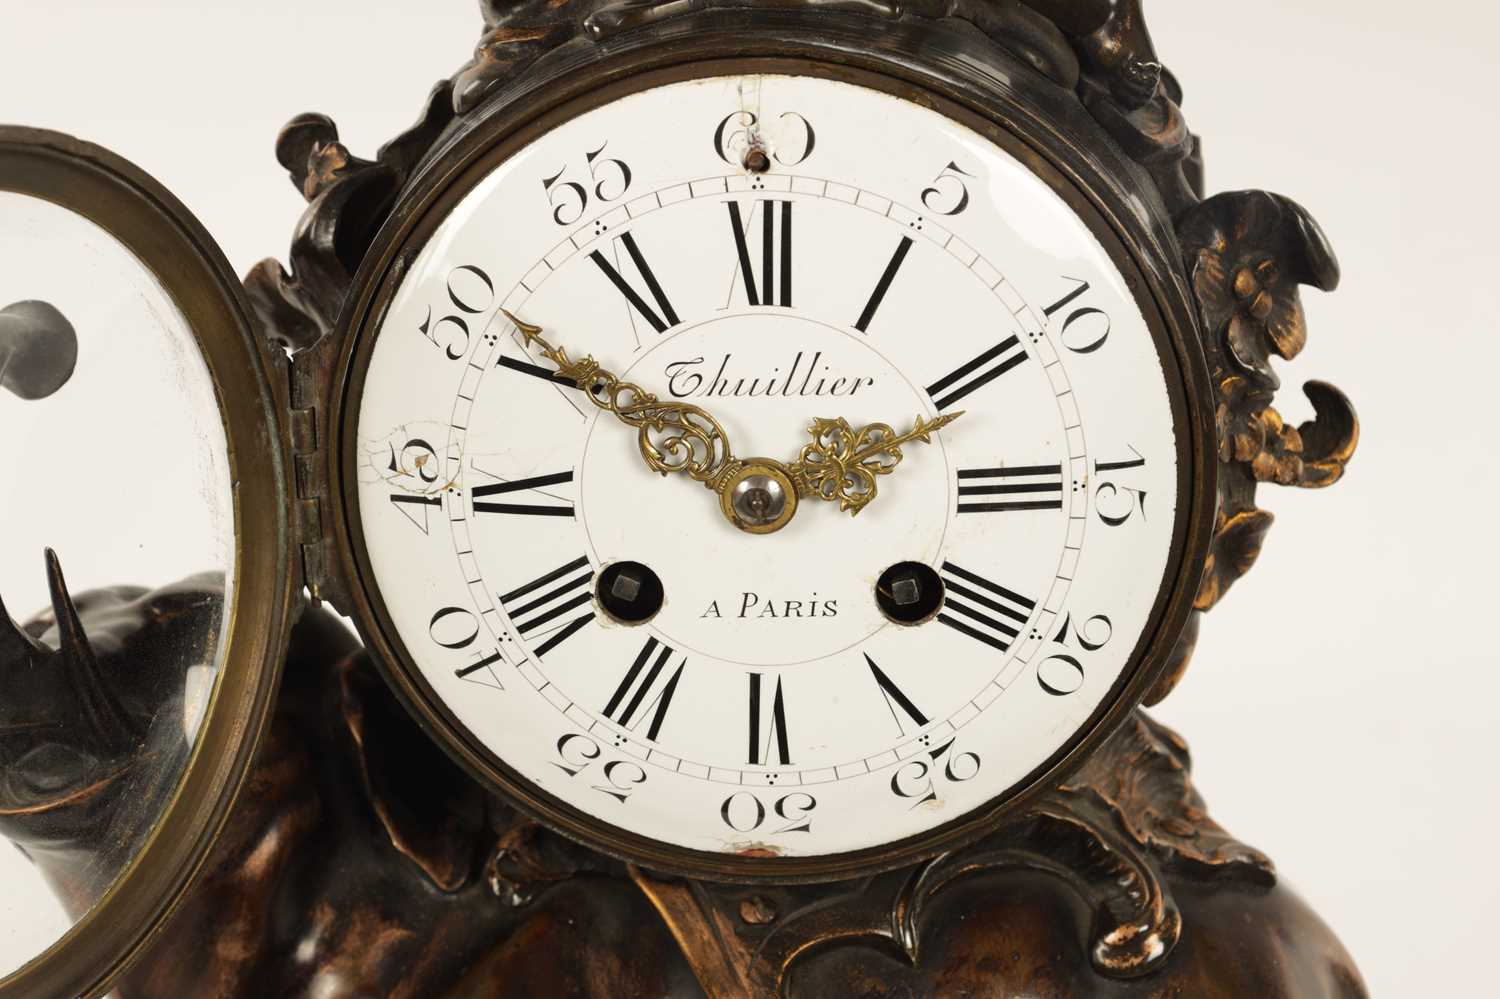 THUILLIER, A PARIS. A LATE 19TH CENTURY FRENCH PATINATED BRONZE MANTEL CLOCK - Image 7 of 14